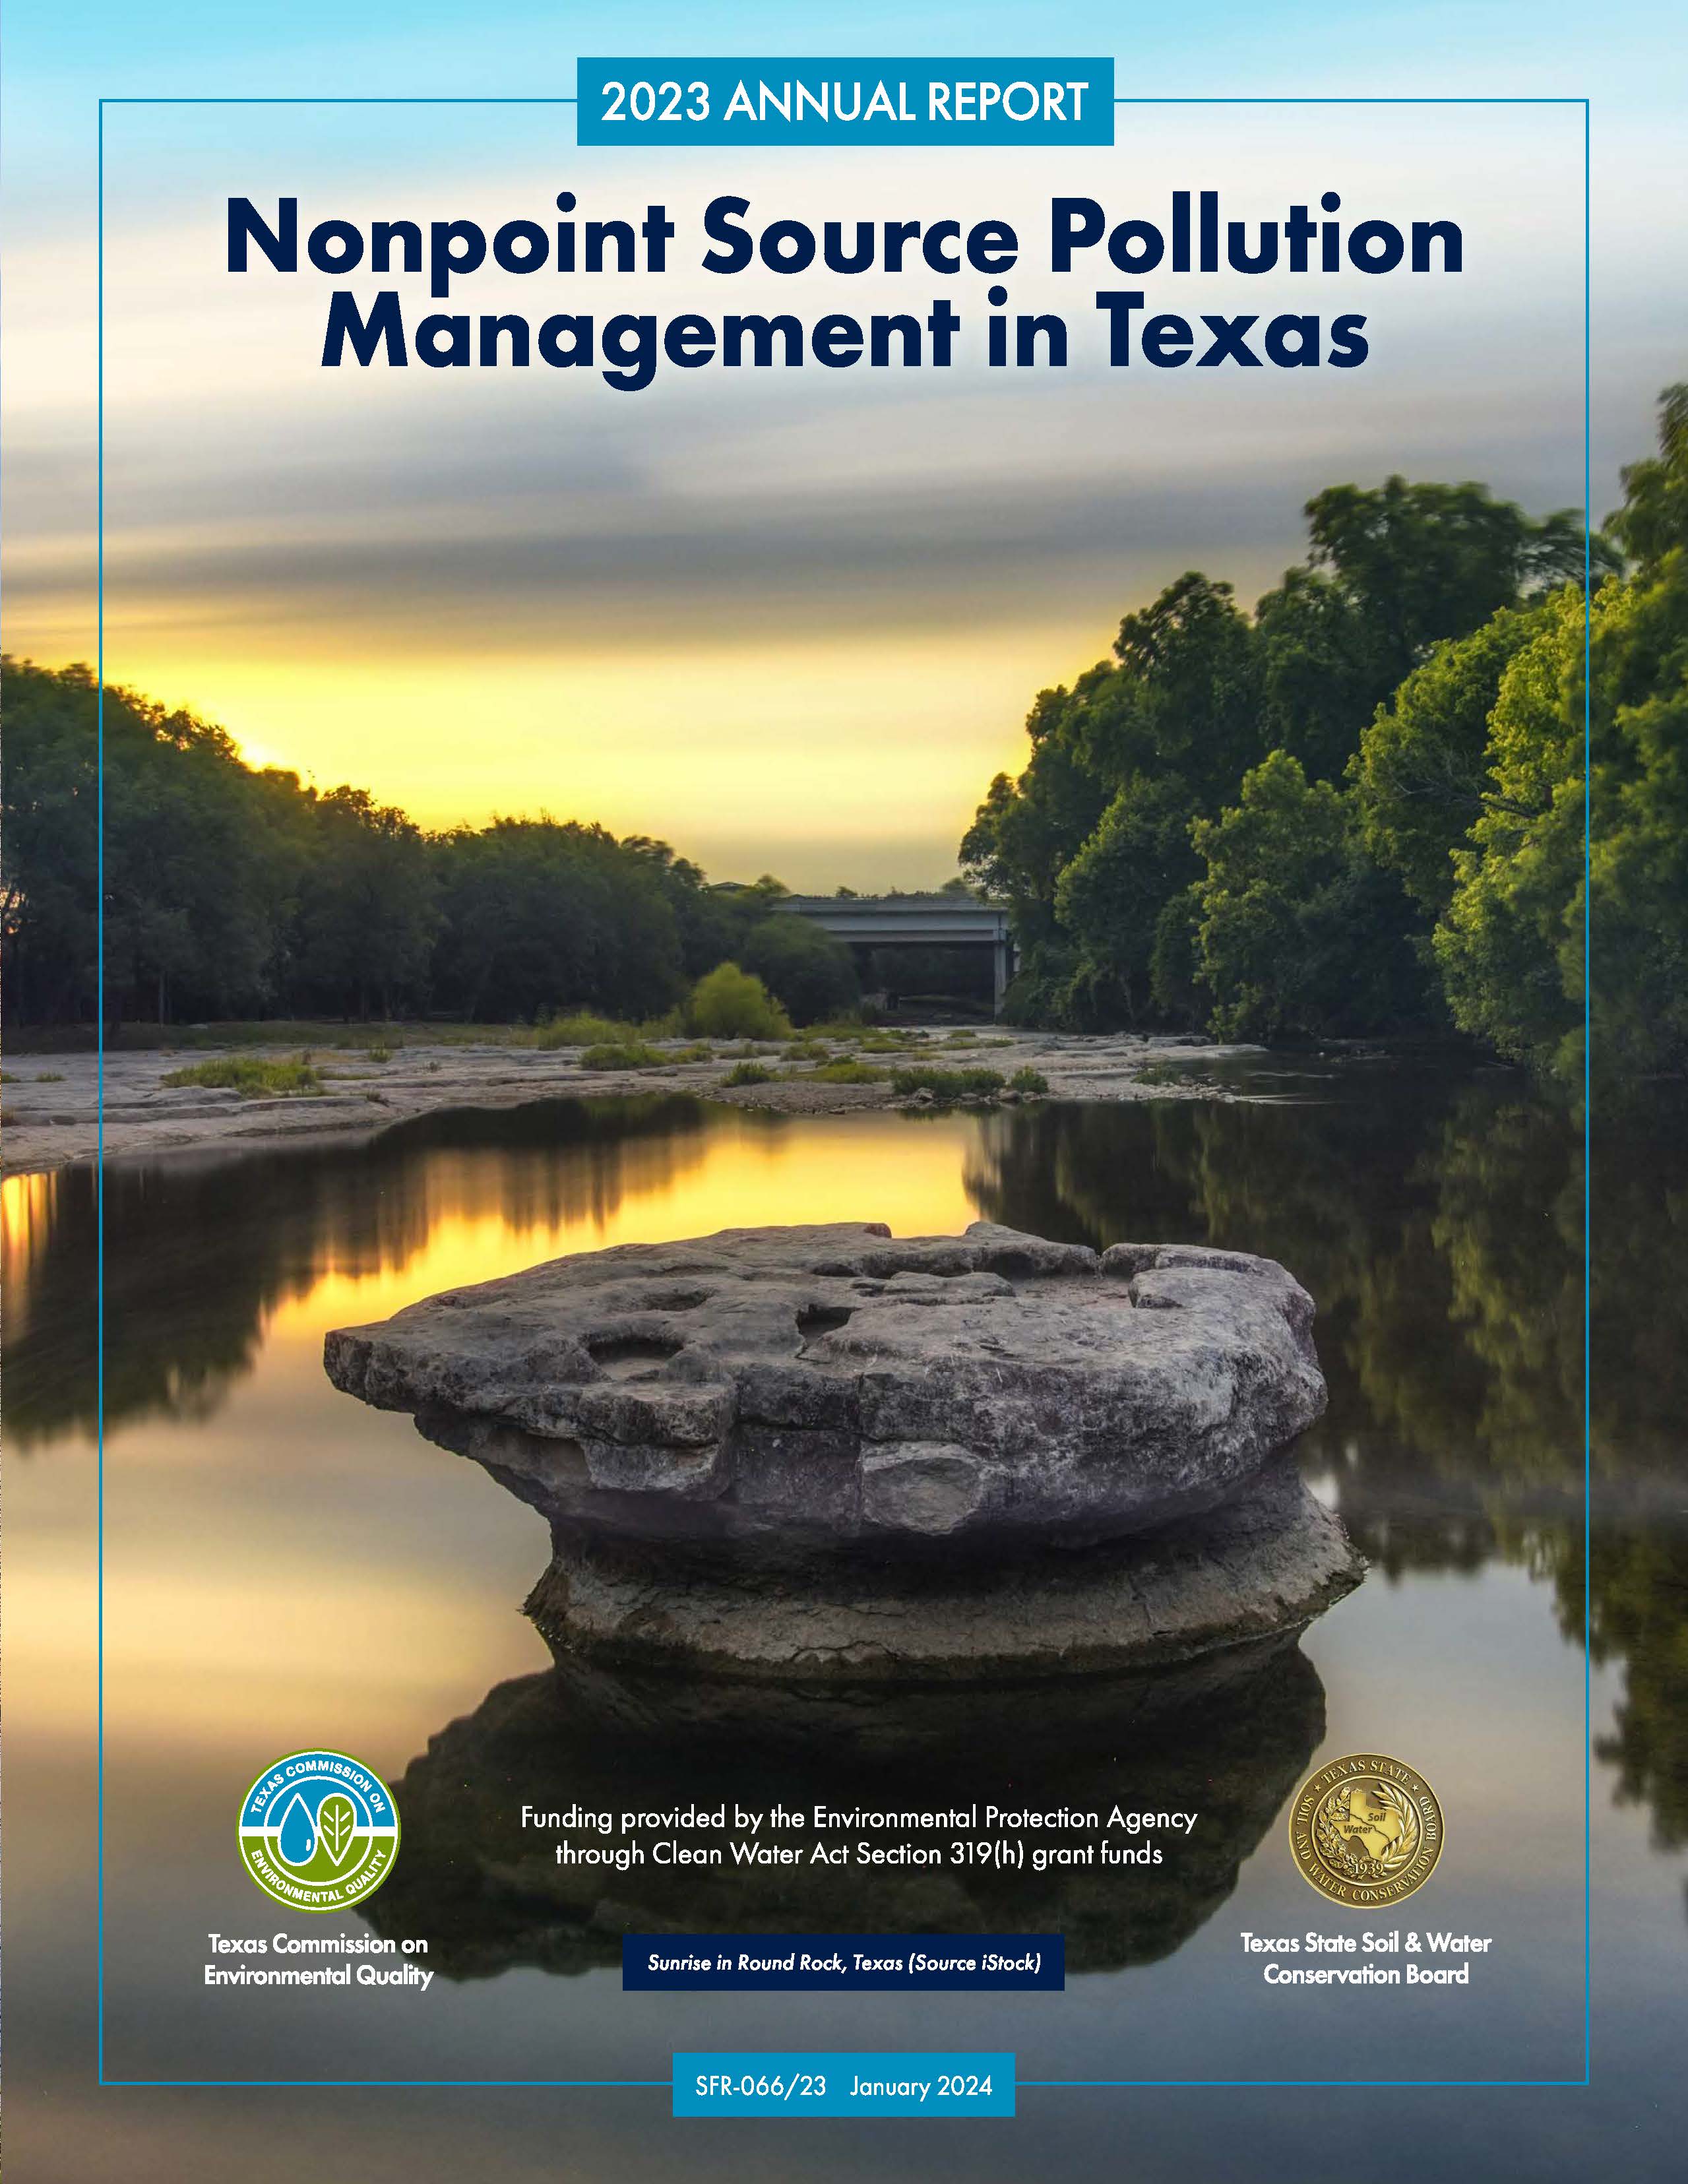 Cover of the Nonpoint Source Program's annual report with an image of a rock in the middle of a stream.